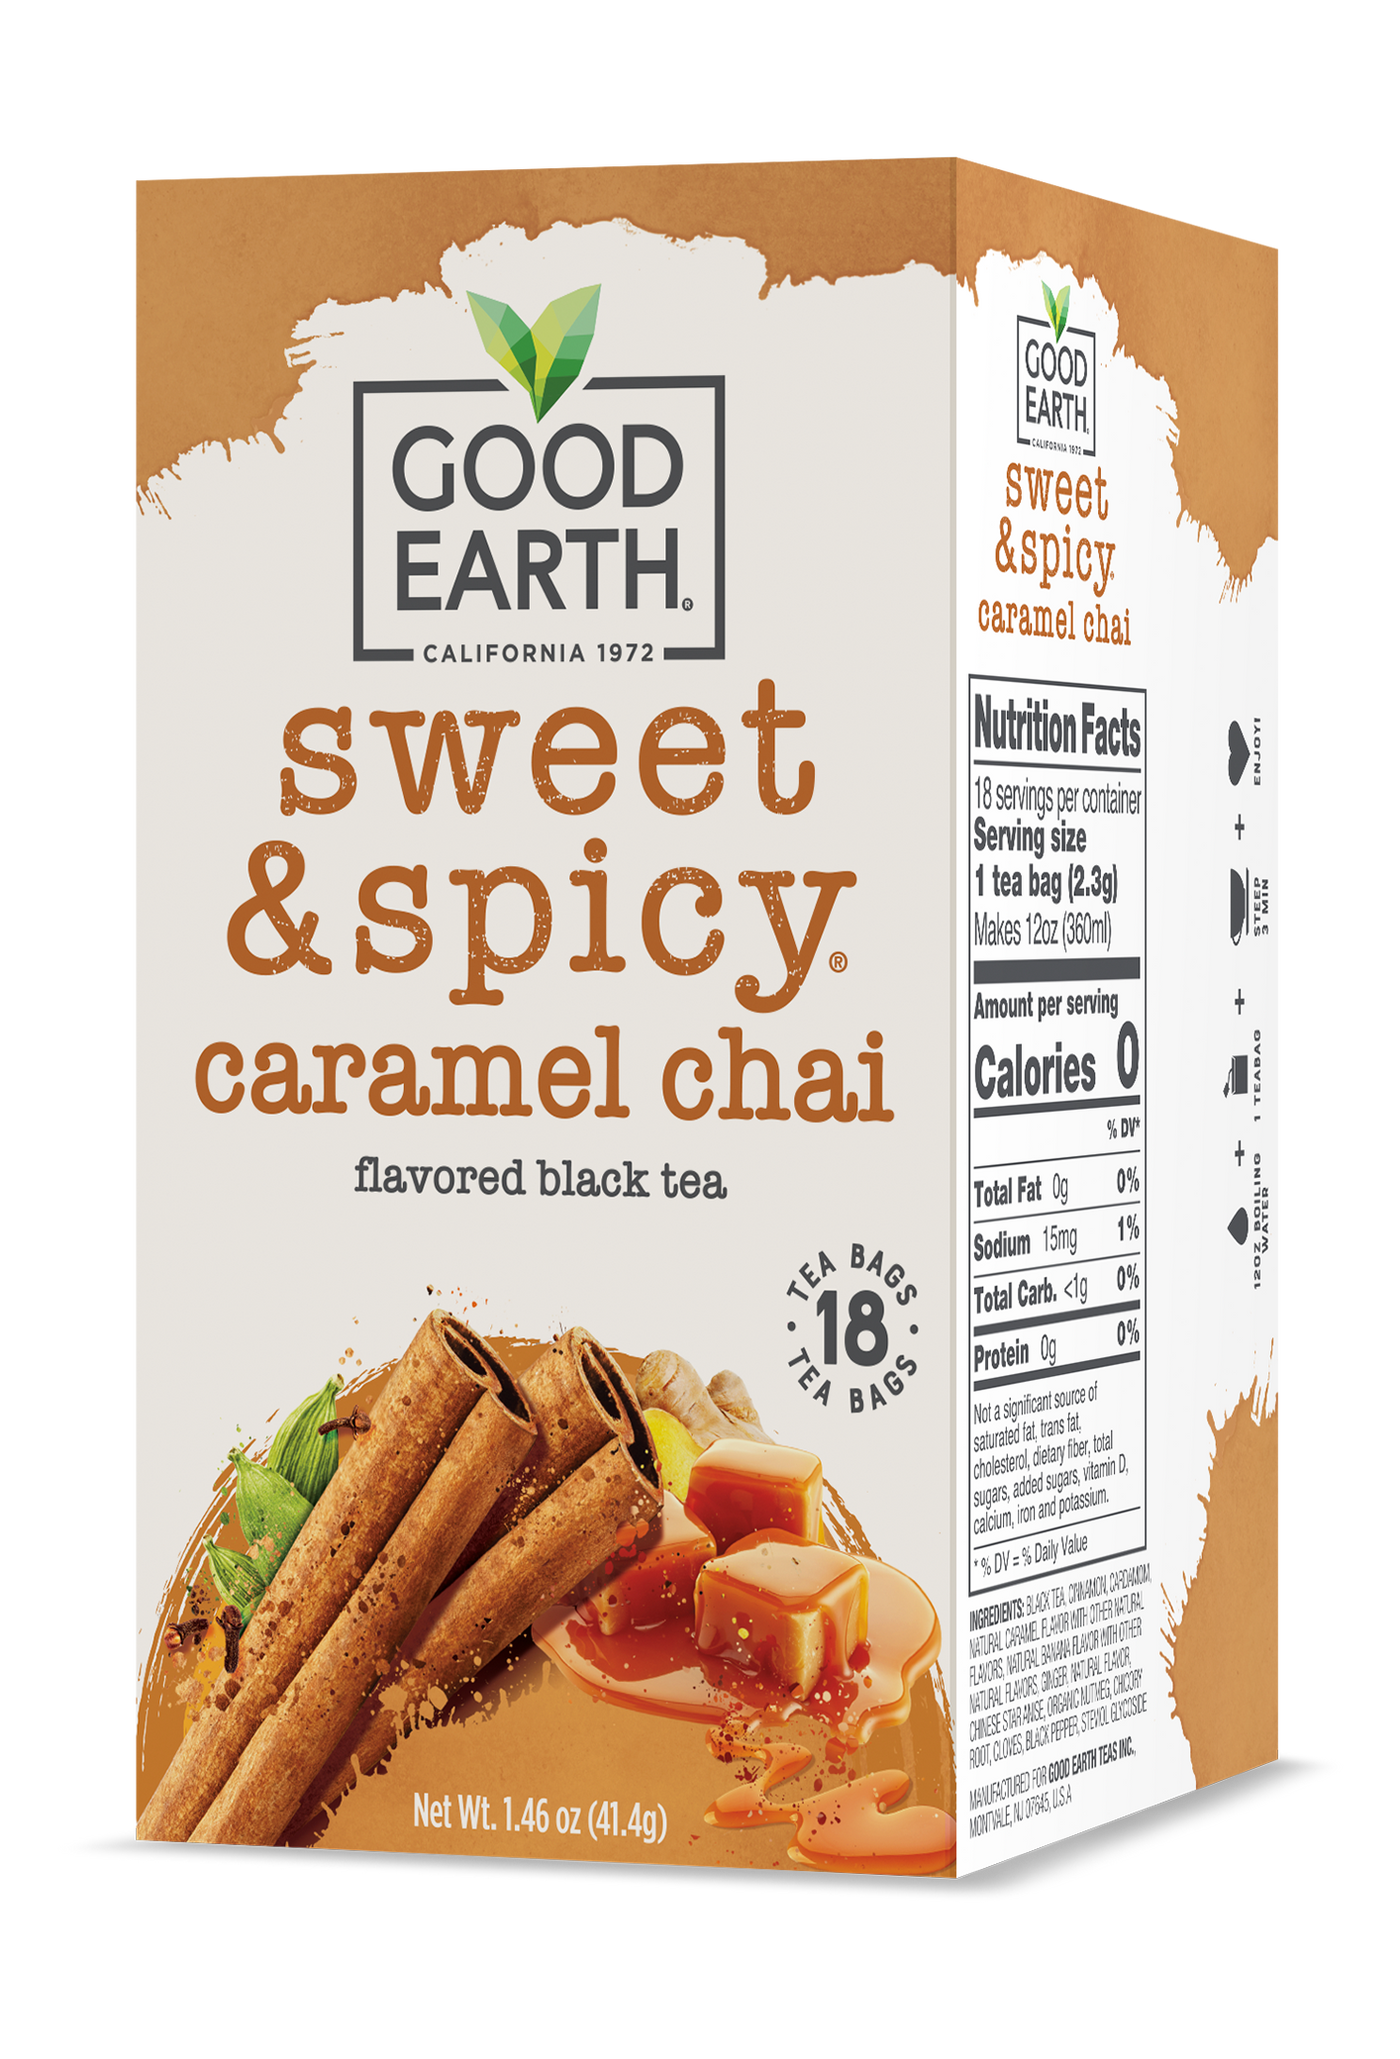 Sweet & Spicy Caramel Chai packaging